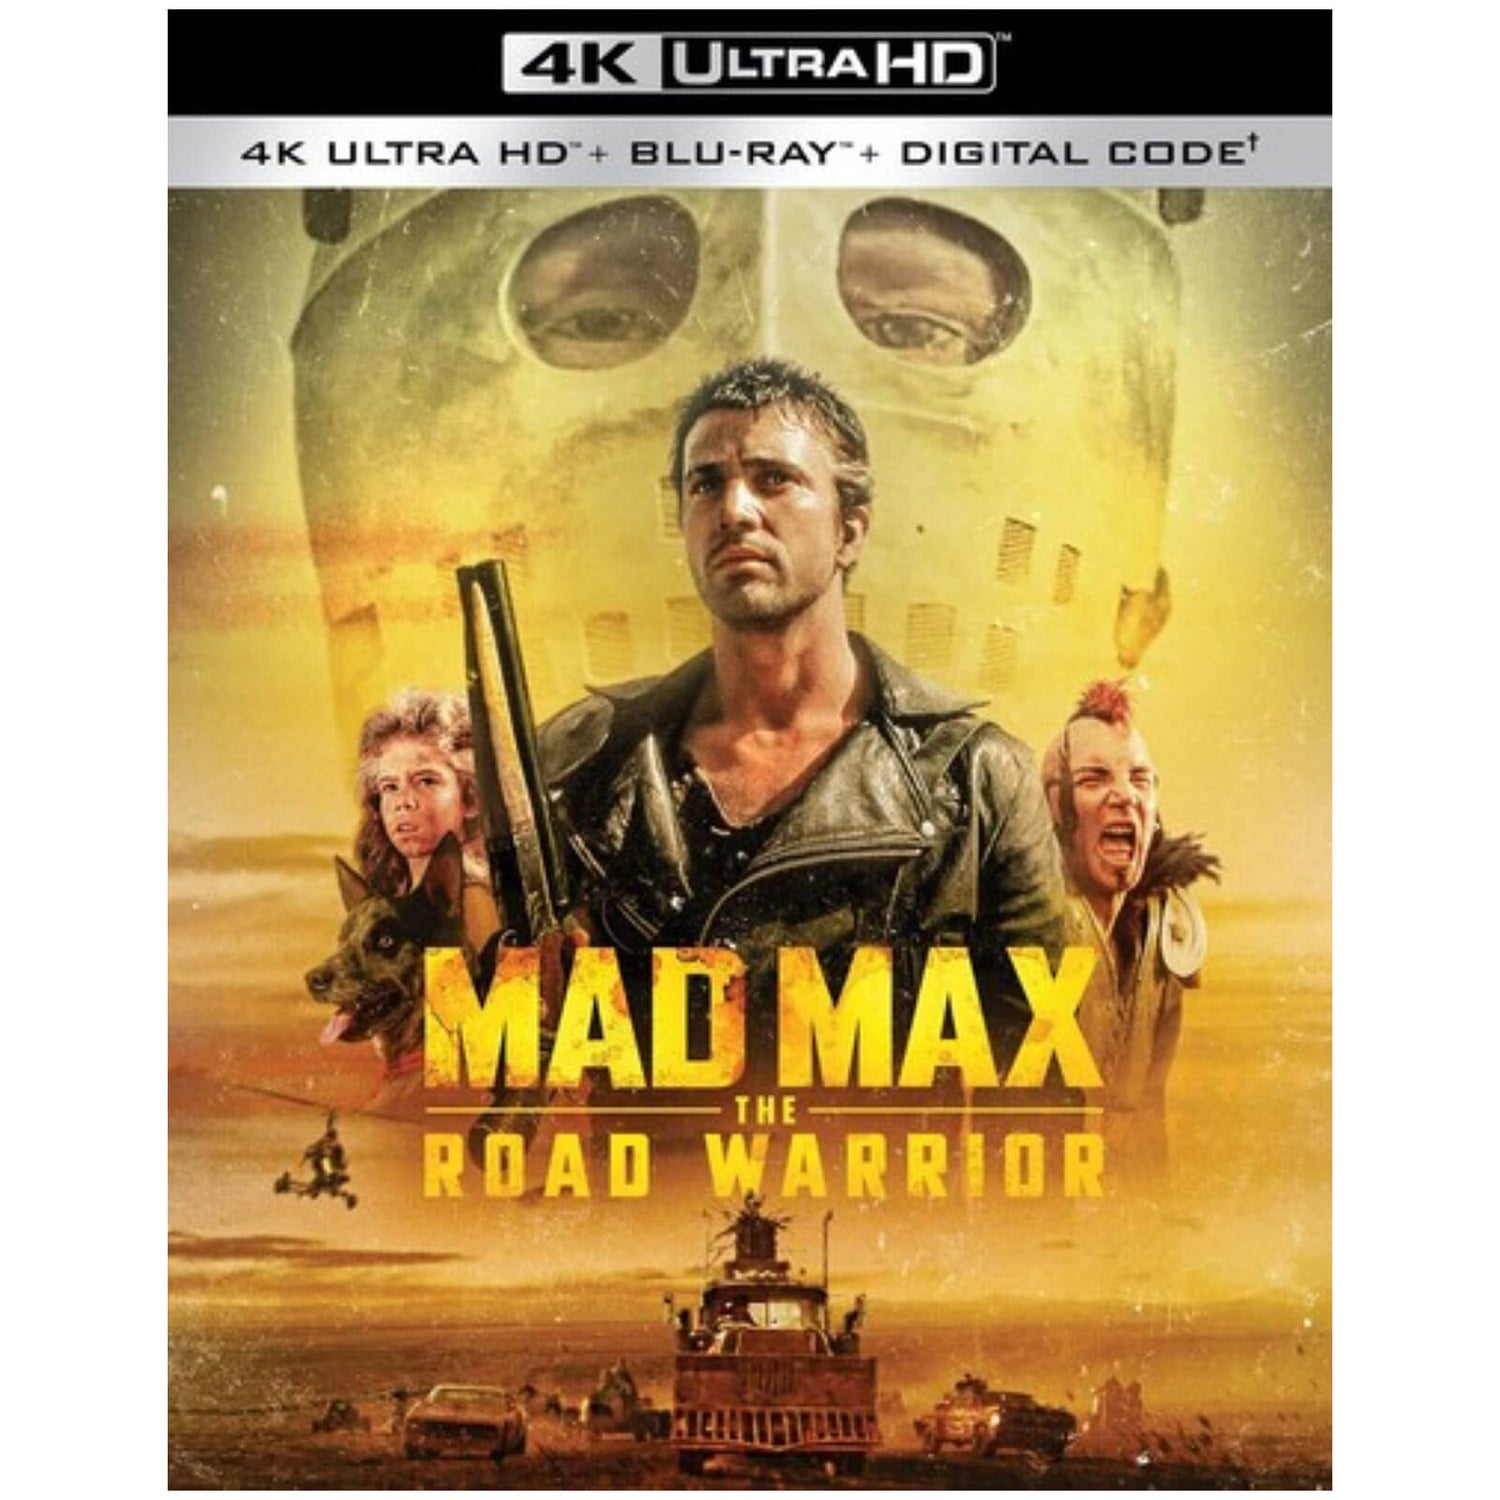 Mad Max: The Road Warrior - 4K Ultra HD (Includes Blu-ray)